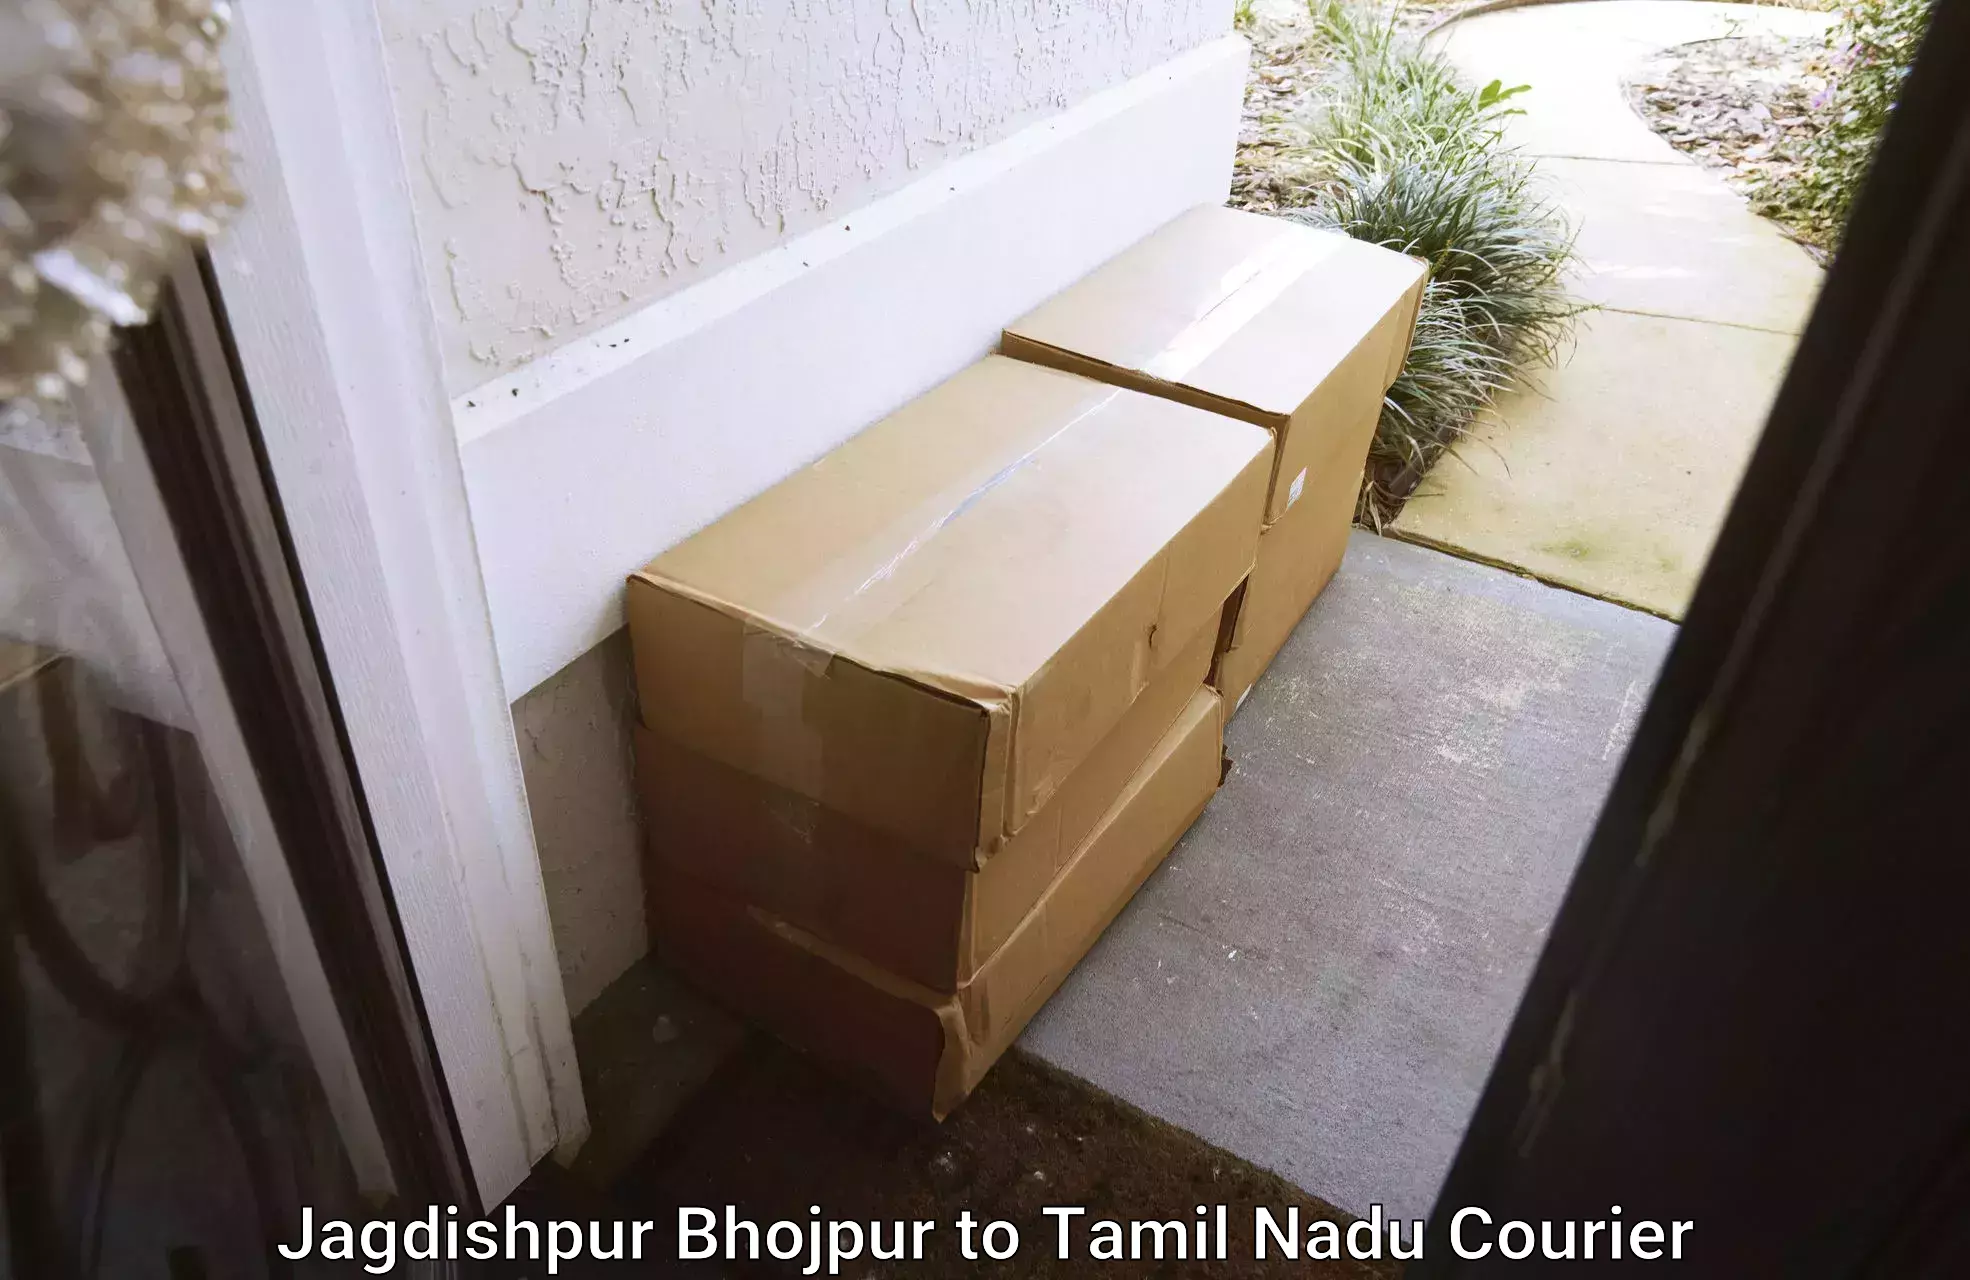 Door-to-door relocation services Jagdishpur Bhojpur to Sri Ramachandra Institute of Higher Education and Research Chennai